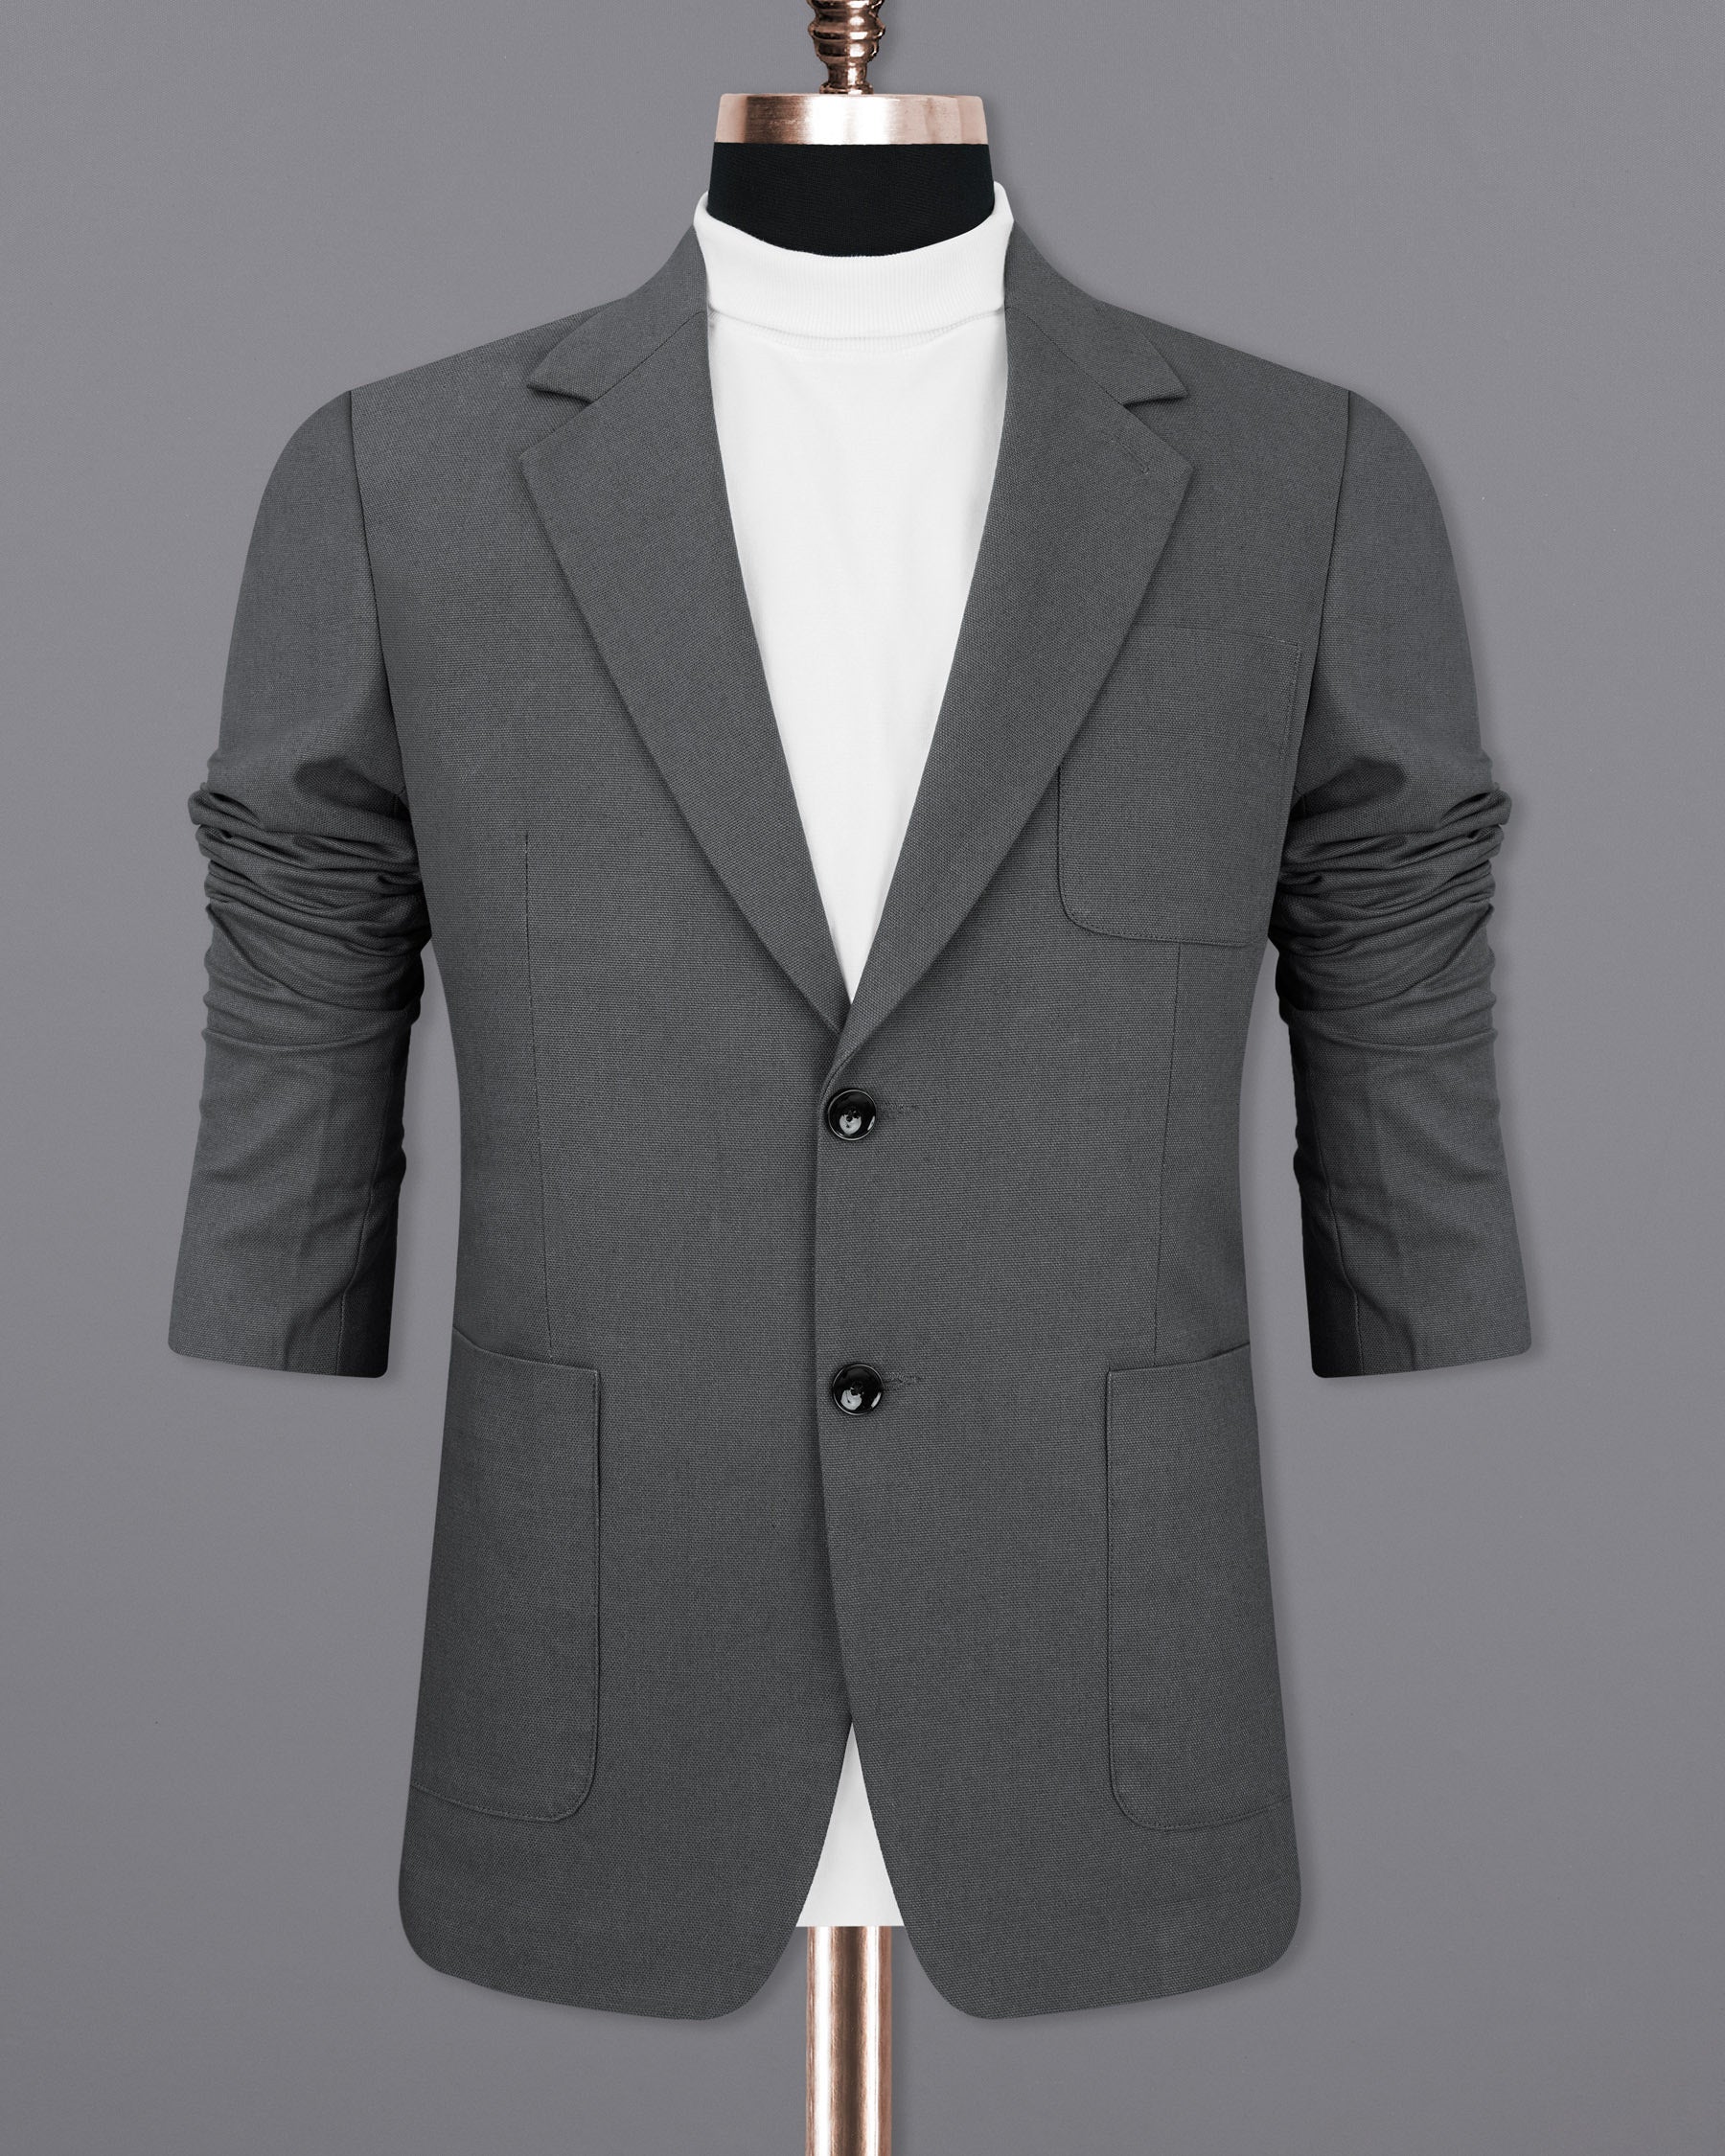 Limed Spruce Grey Single Breasted Sports Blazer BL1919-SB-PP-36,BL1919-SB-PP-38,BL1919-SB-PP-40,BL1919-SB-PP-42,BL1919-SB-PP-44,BL1919-SB-PP-46,BL1919-SB-PP-48,BL1919-SB-PP-50,BL1919-SB-PP-52,BL1919-SB-PP-54,BL1919-SB-PP-56,BL1919-SB-PP-58,BL1919-SB-PP-60